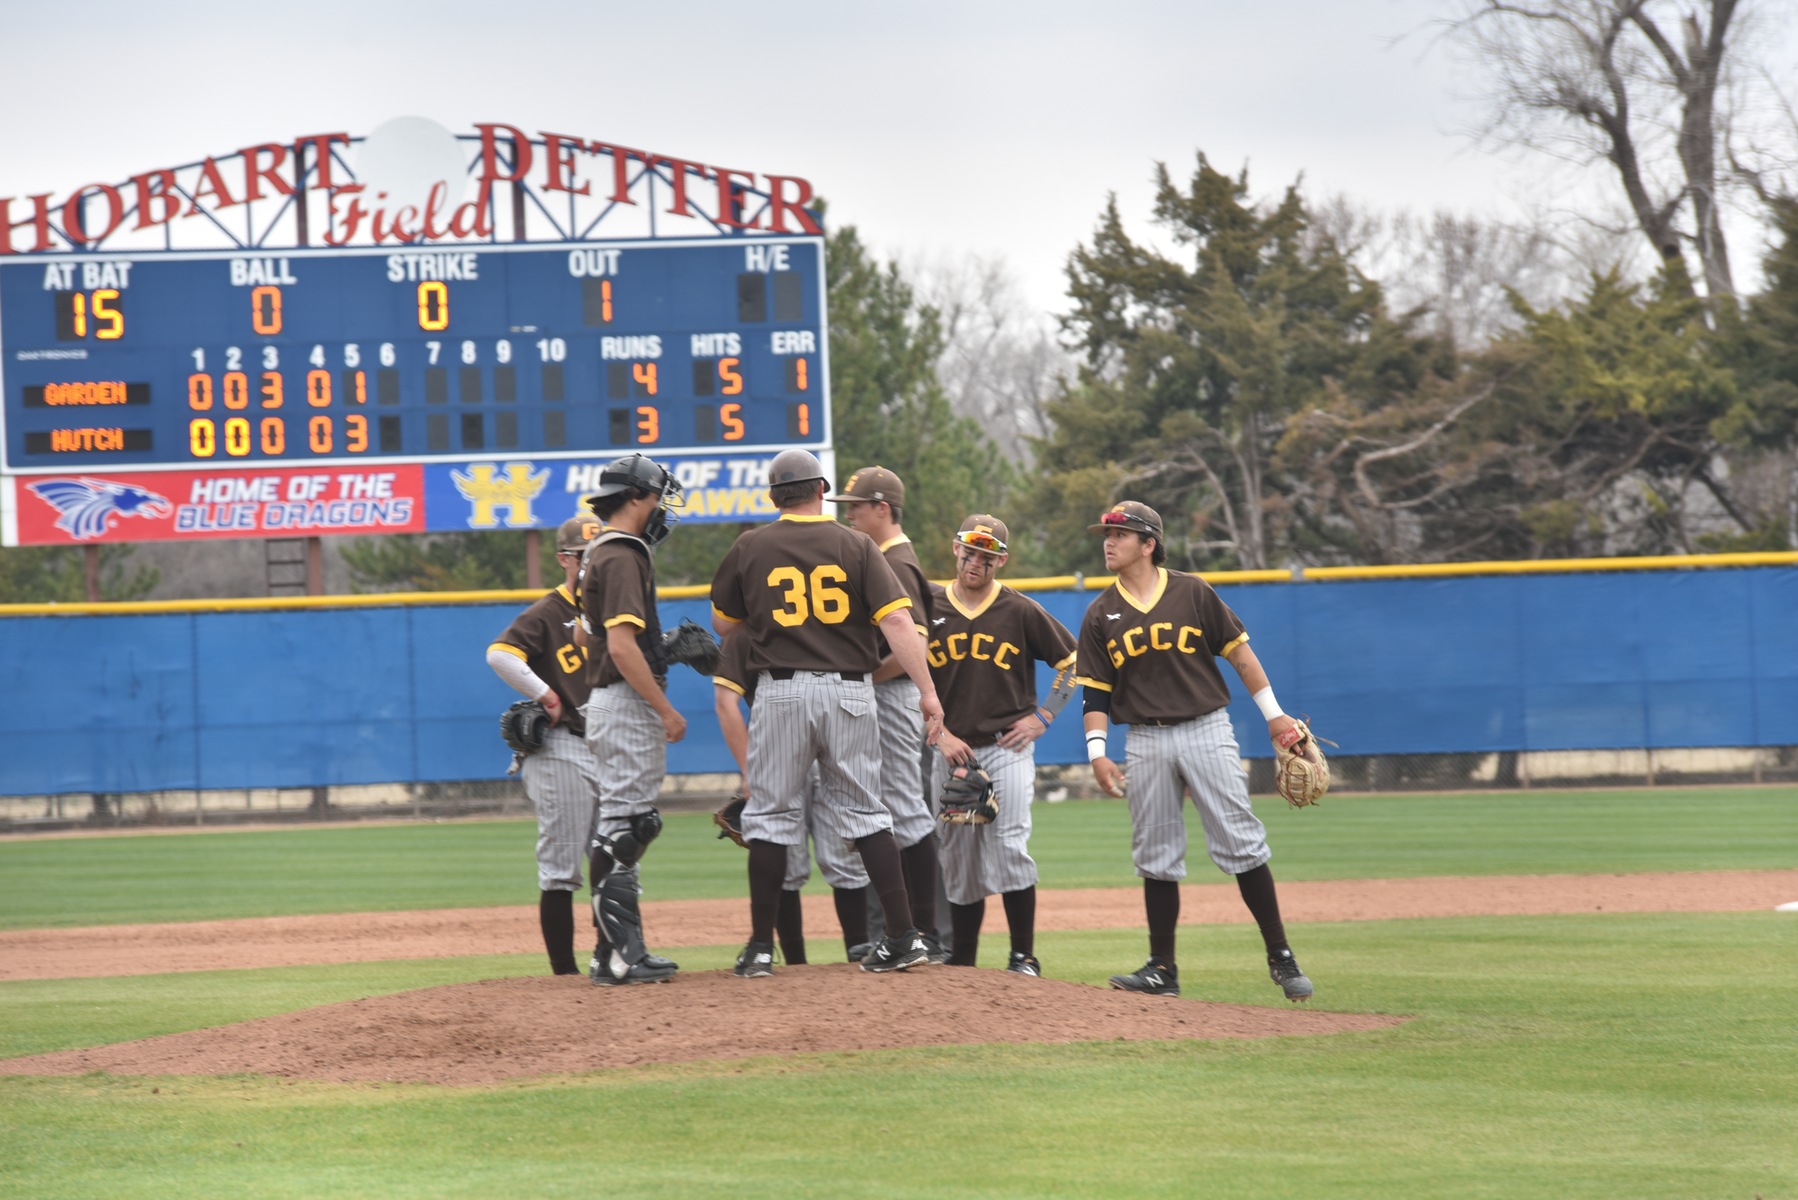 Broncbusters lose to Hutch on walk-off homer